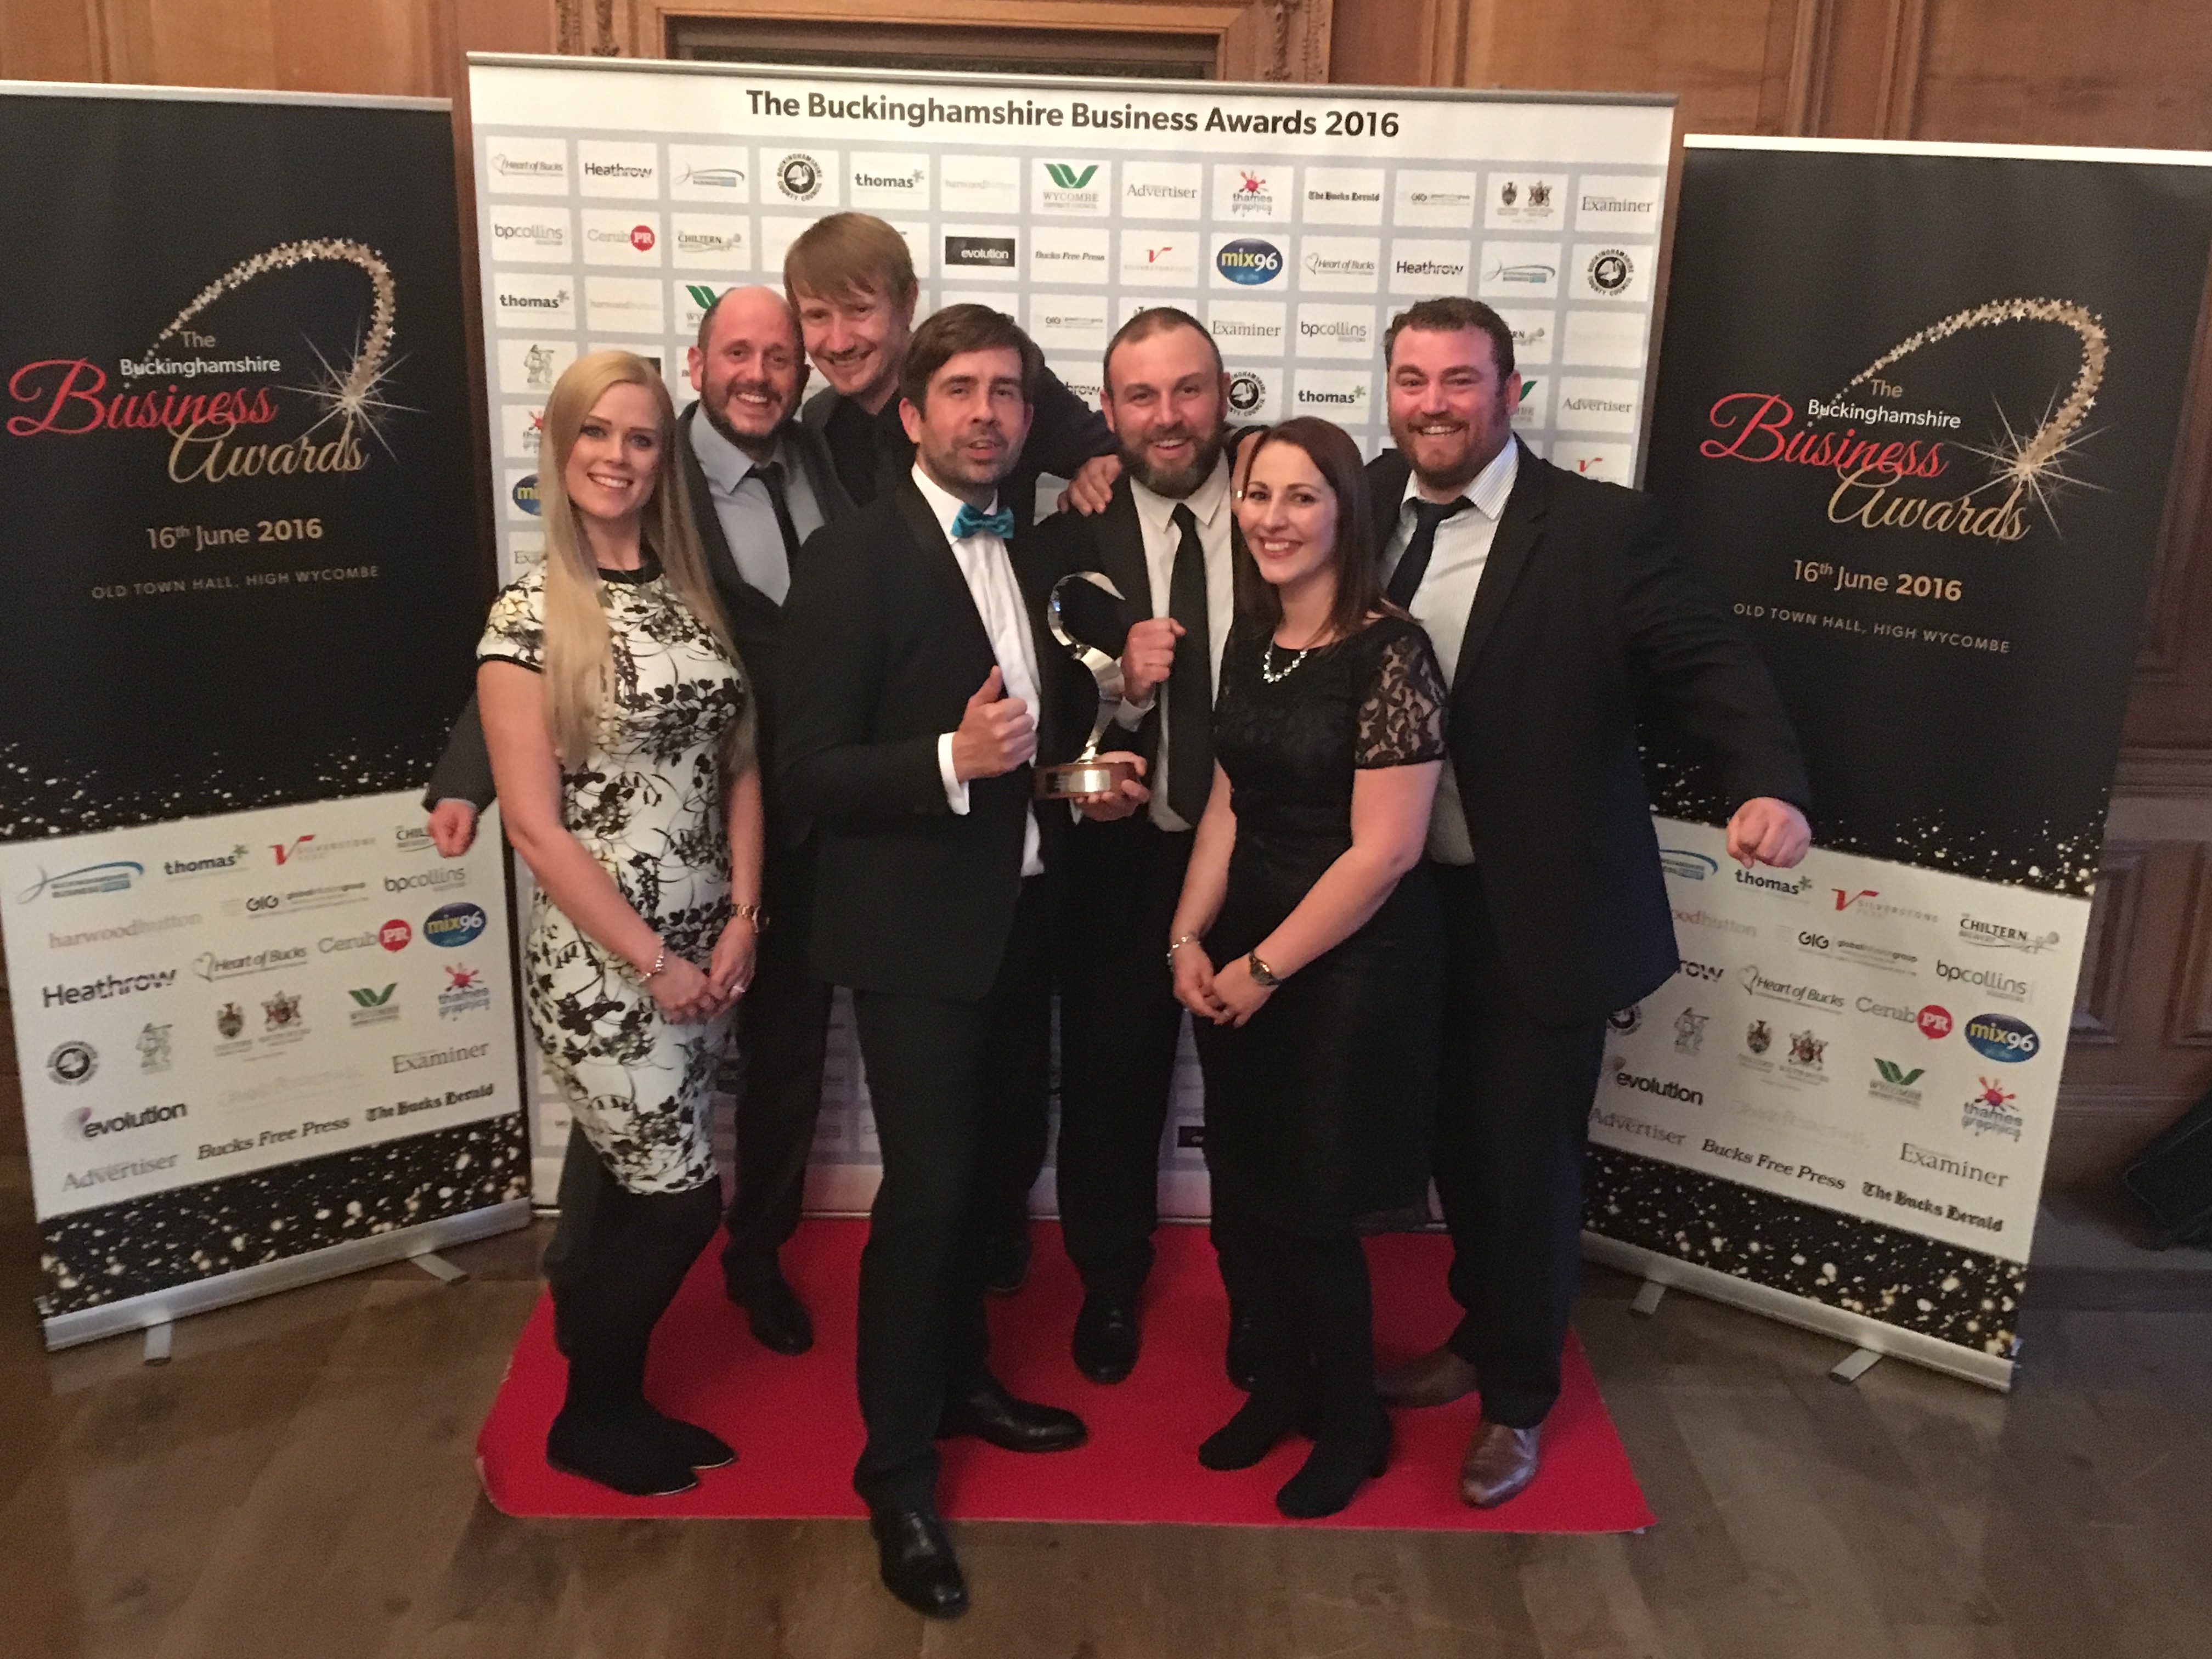 The Window Film Company awarded 'Excellence in Customer Service' at the Bucks Business Awards